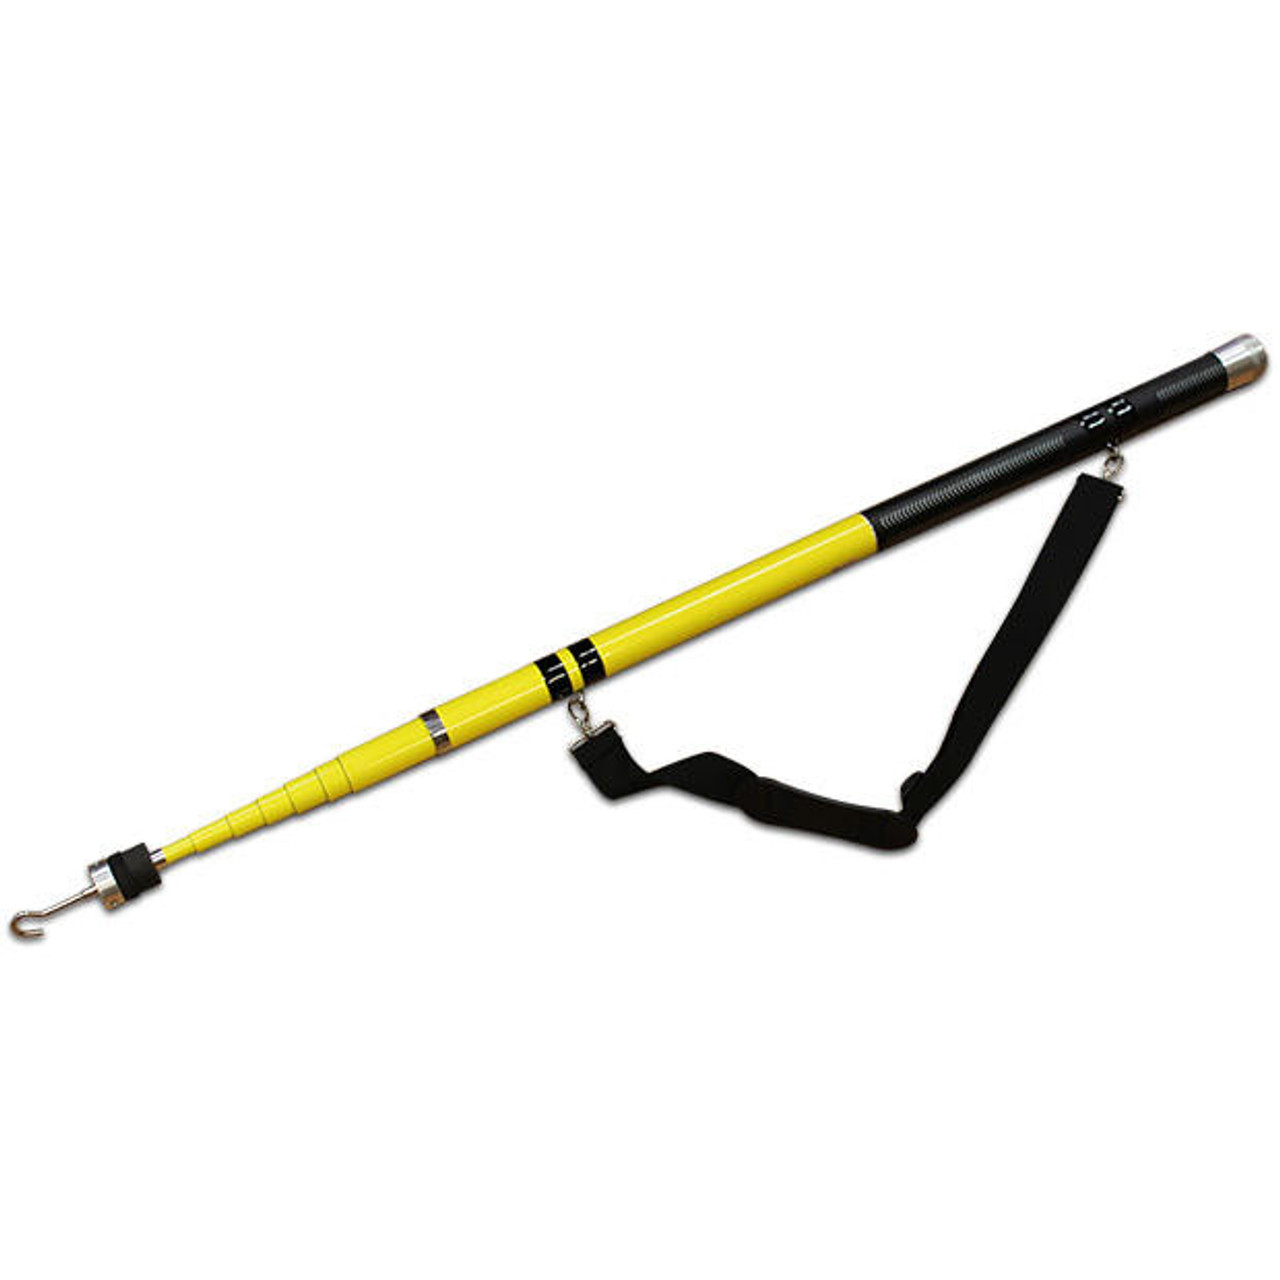 Reach out with the EOD Extendable Pole to give you an extra